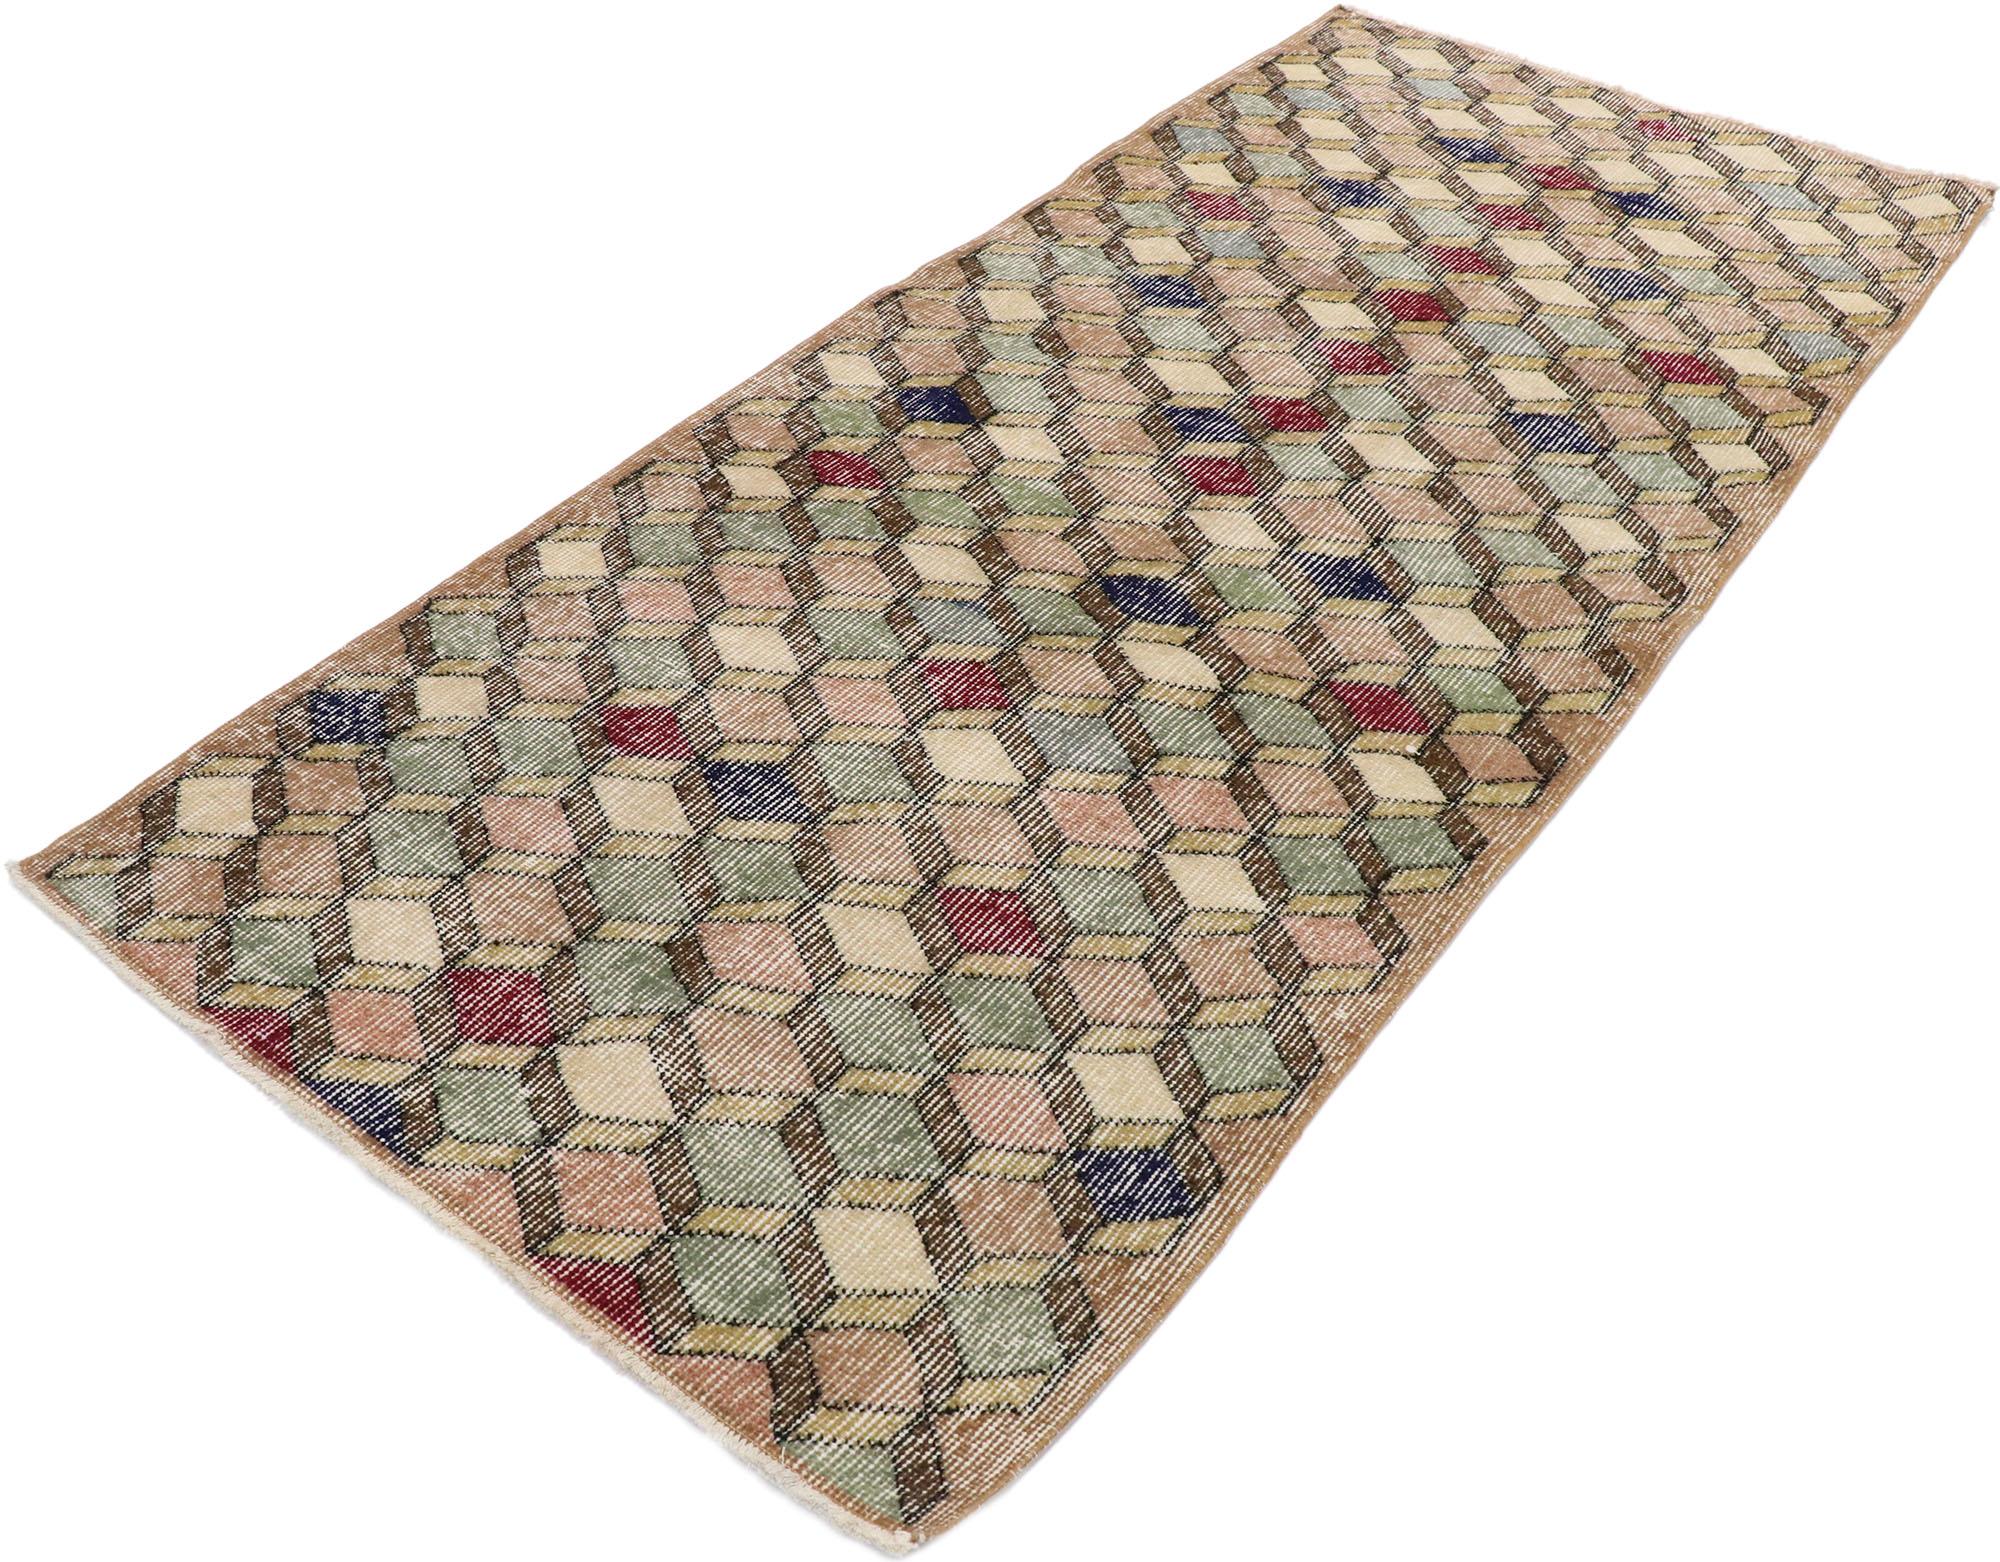 53350, distressed vintage Turkish Sivas rug with rustic Mid-Century Modern style. This hand knotted wool distressed vintage Turkish Sivas rug features an all-over lattice pattern spread across an abrashed field. Cream and brown parallelograms form a